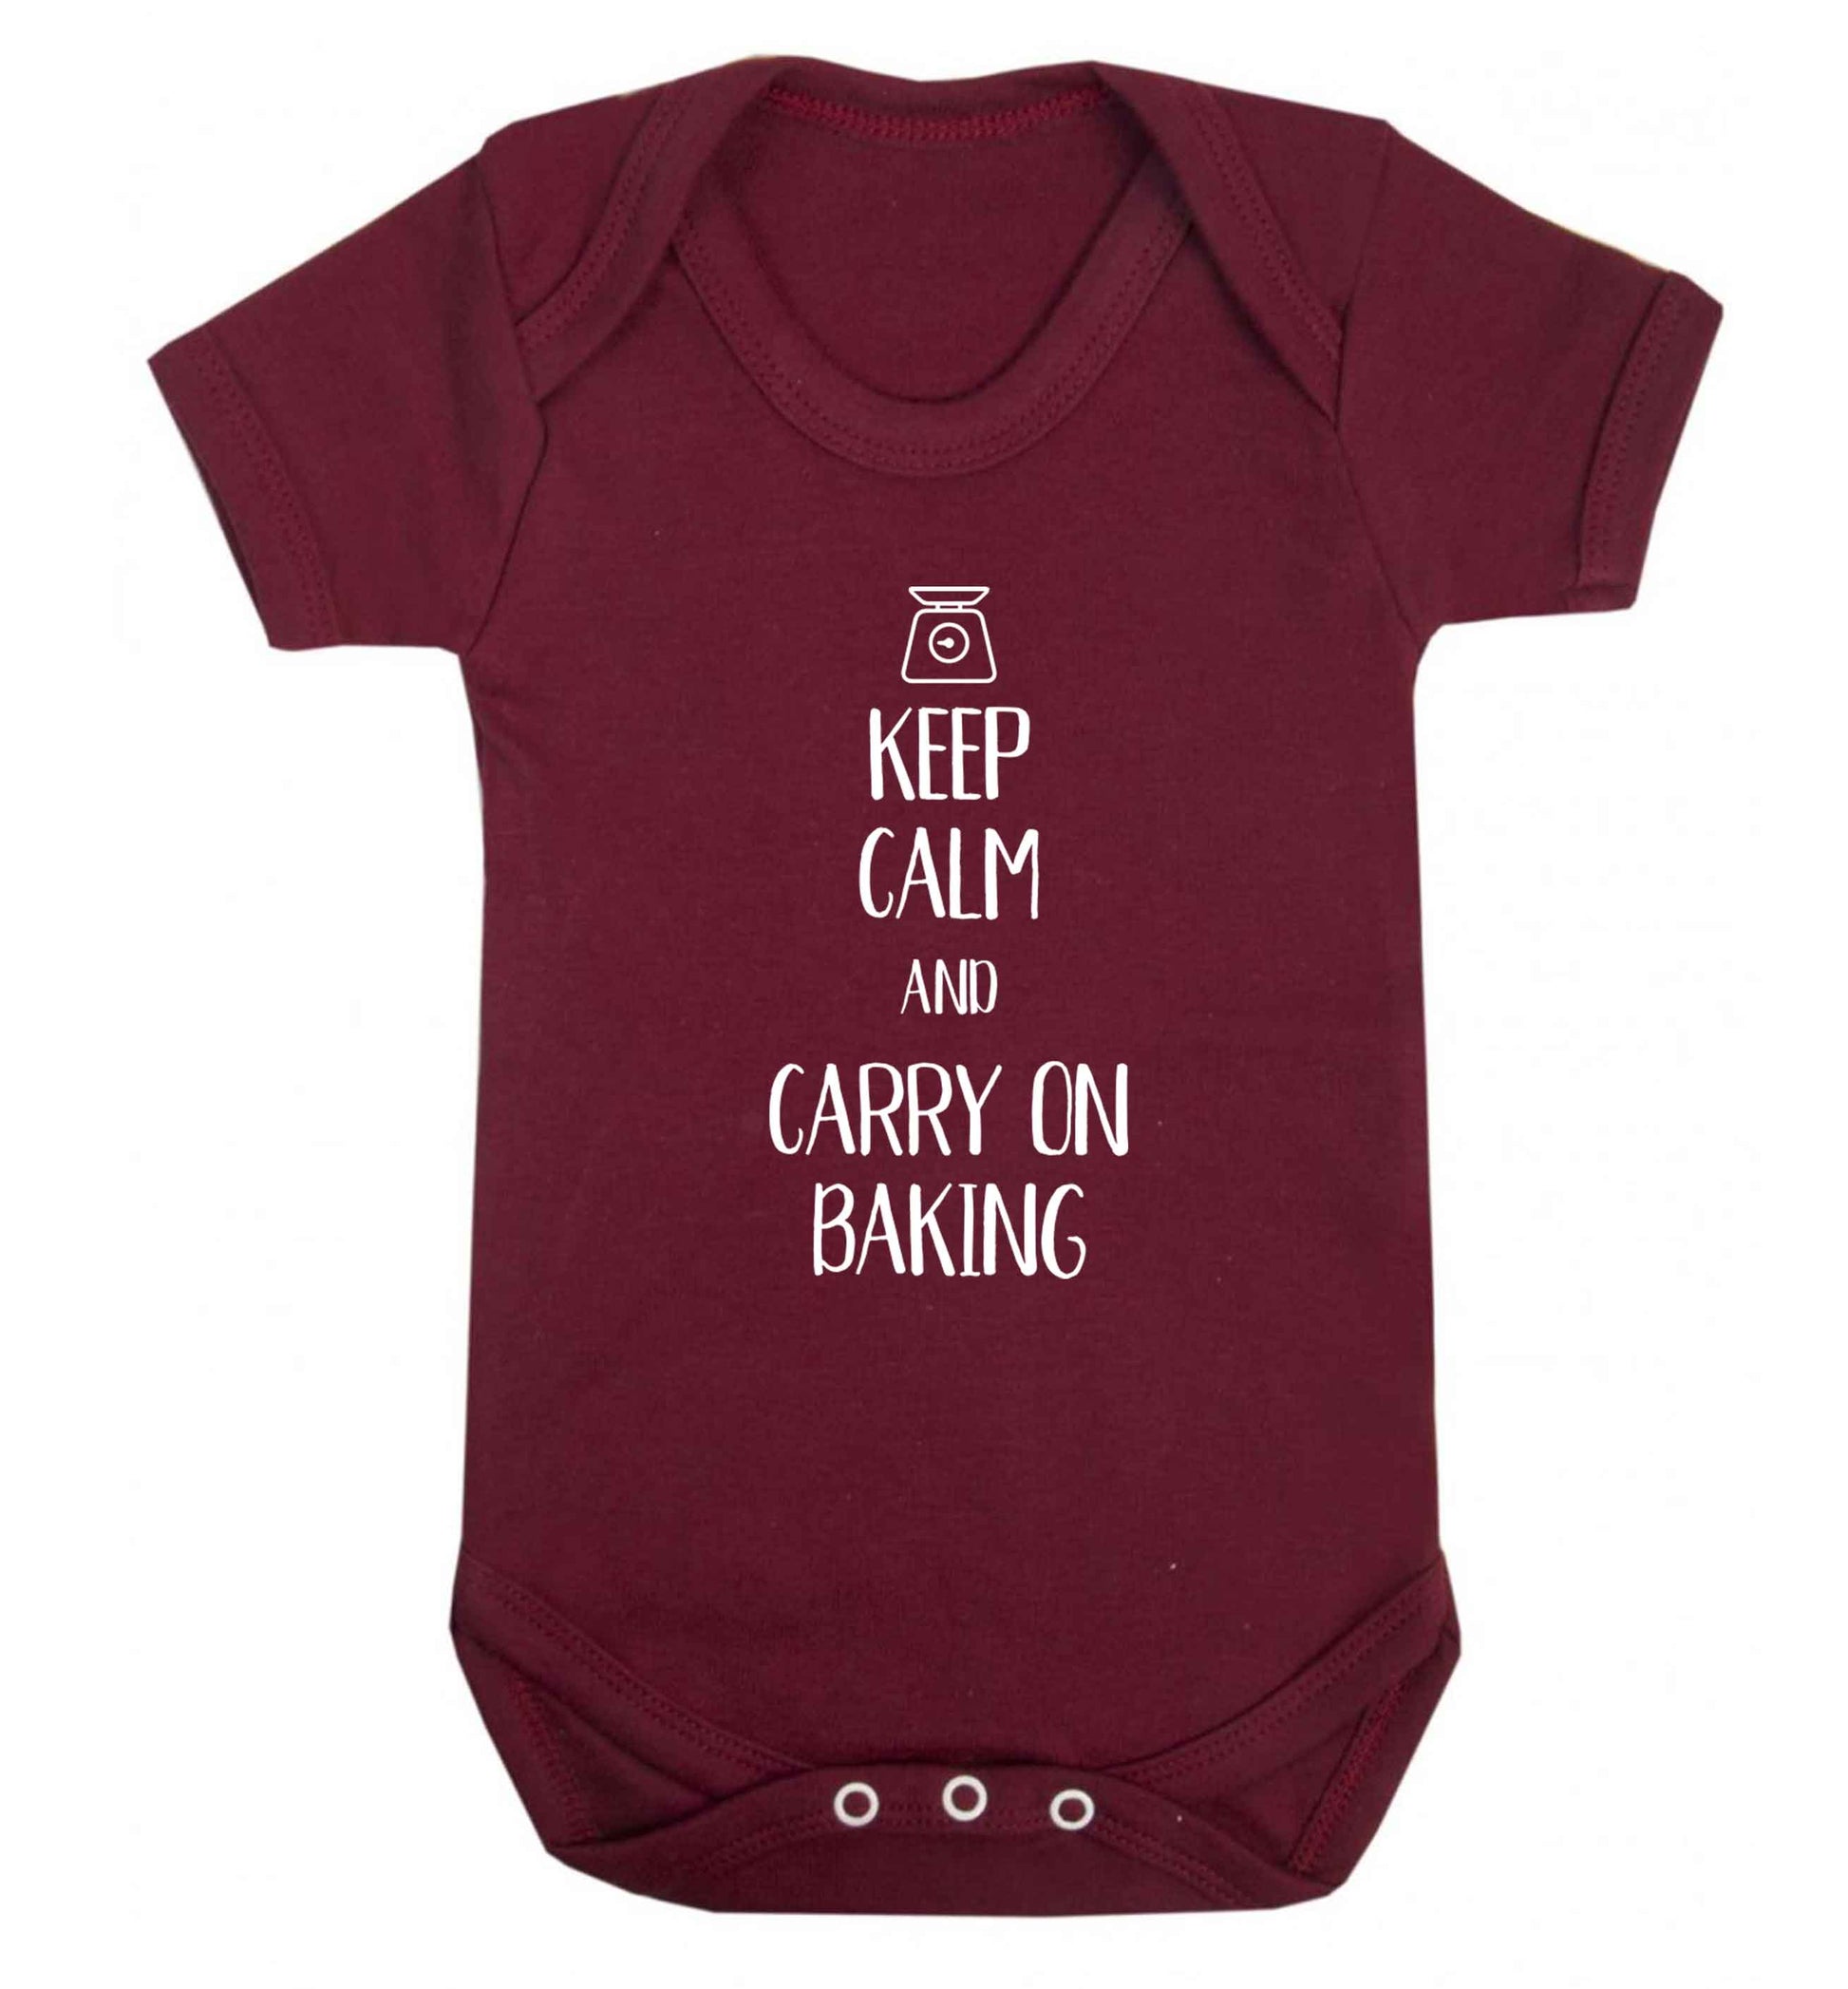 Keep calm and carry on baking Baby Vest maroon 18-24 months